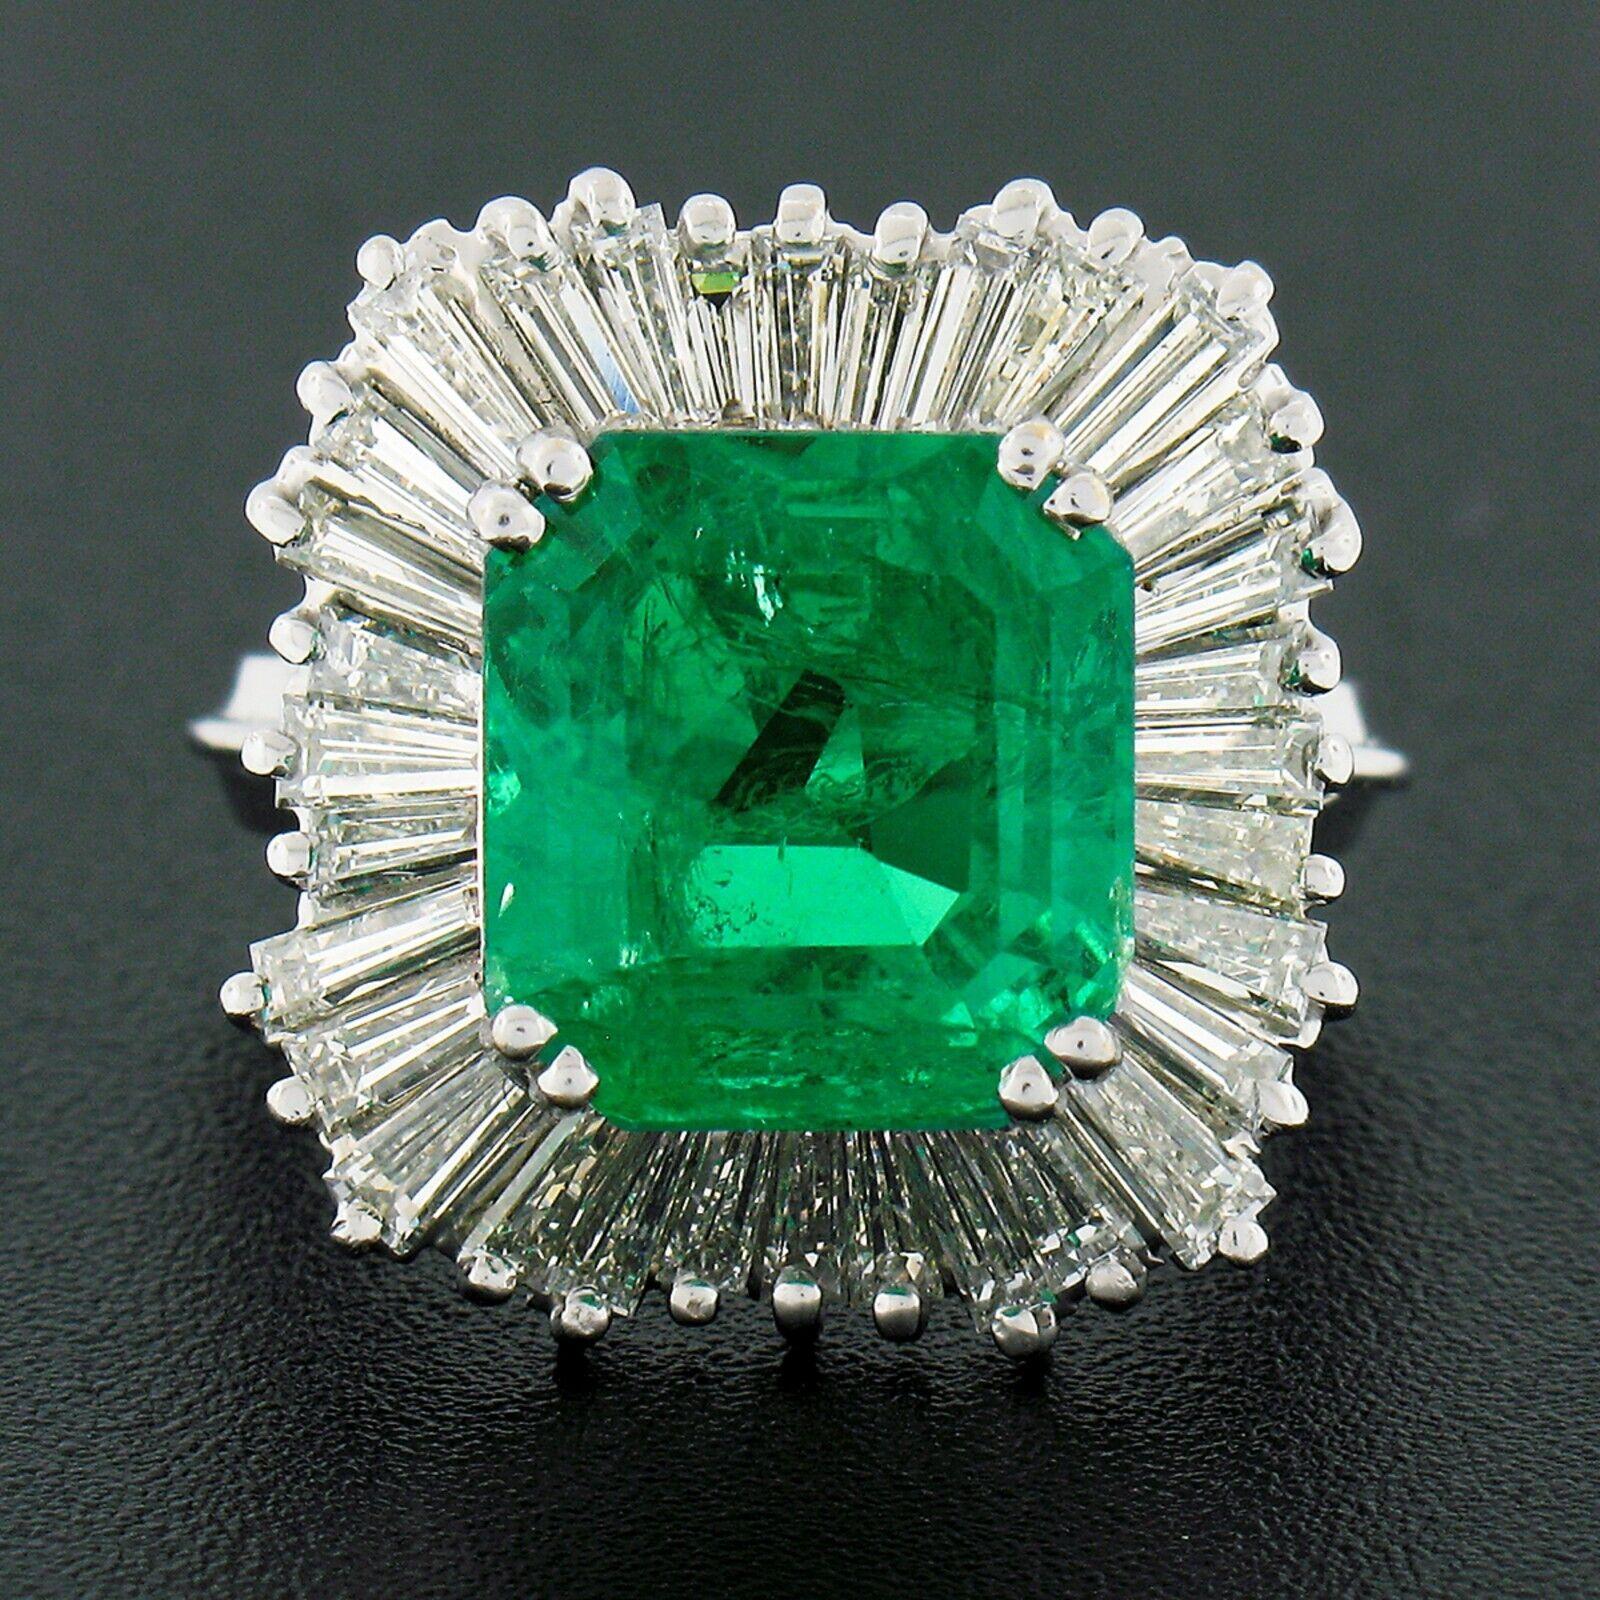 You are looking at a MAGICAL emerald and diamond ballerina-style fancy cocktail ring crafted in solid 18k white gold and featuring a large, approximately 5.92 carats emerald cut genuine emerald stone prong set at the center of the ring and is AGL